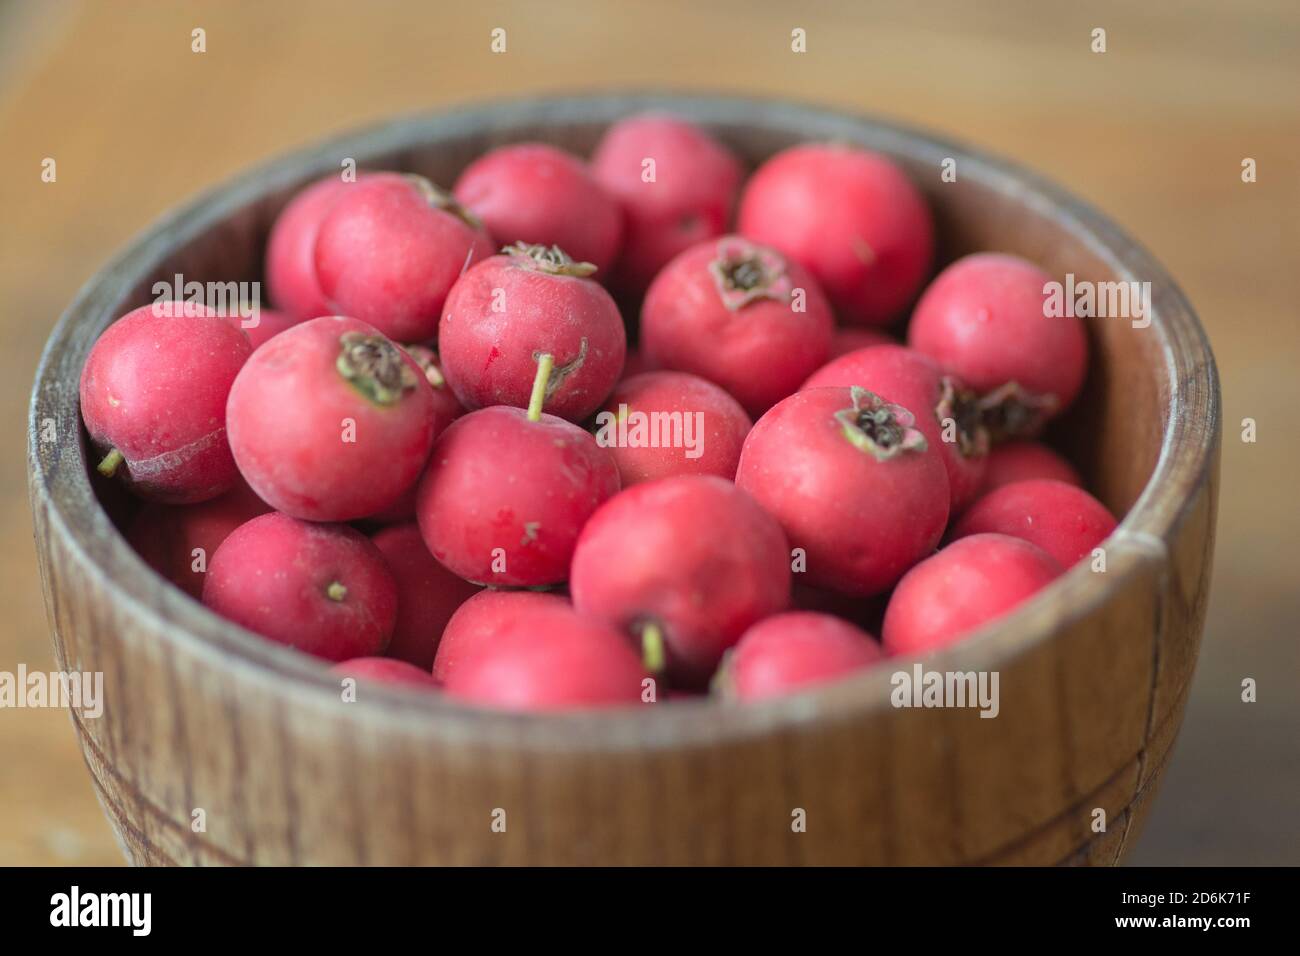 Red Scarlet Hawthorn fruits (Crataegus coccinea), piled up in wooden bowl Stock Photo